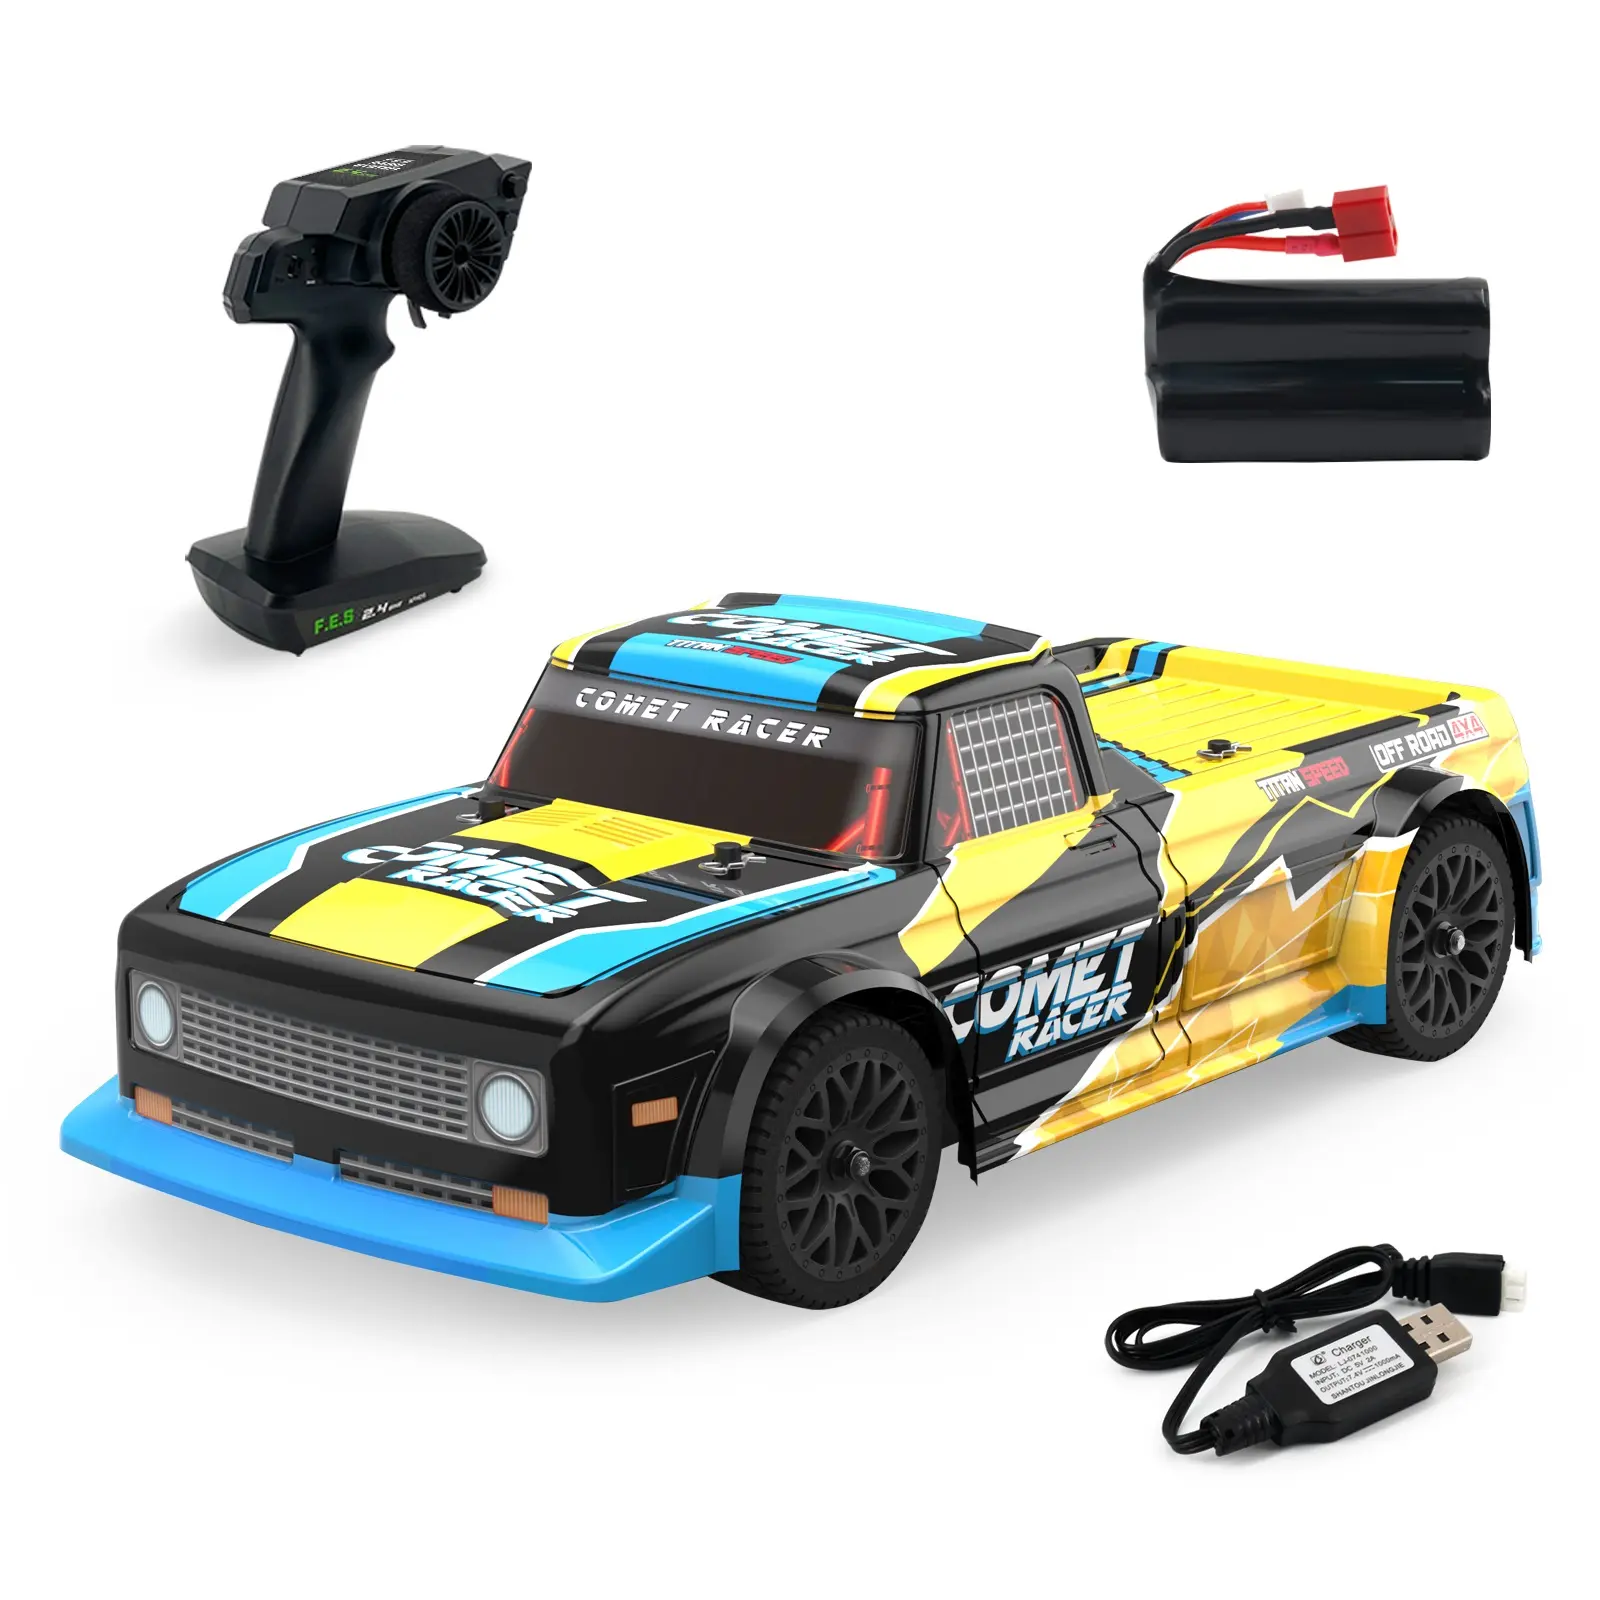 Youngeast 1:10 Fusion 1/10 Jjrc Q125 Rc Monster Truck High Efficient Rc Touring New Cars Hobby